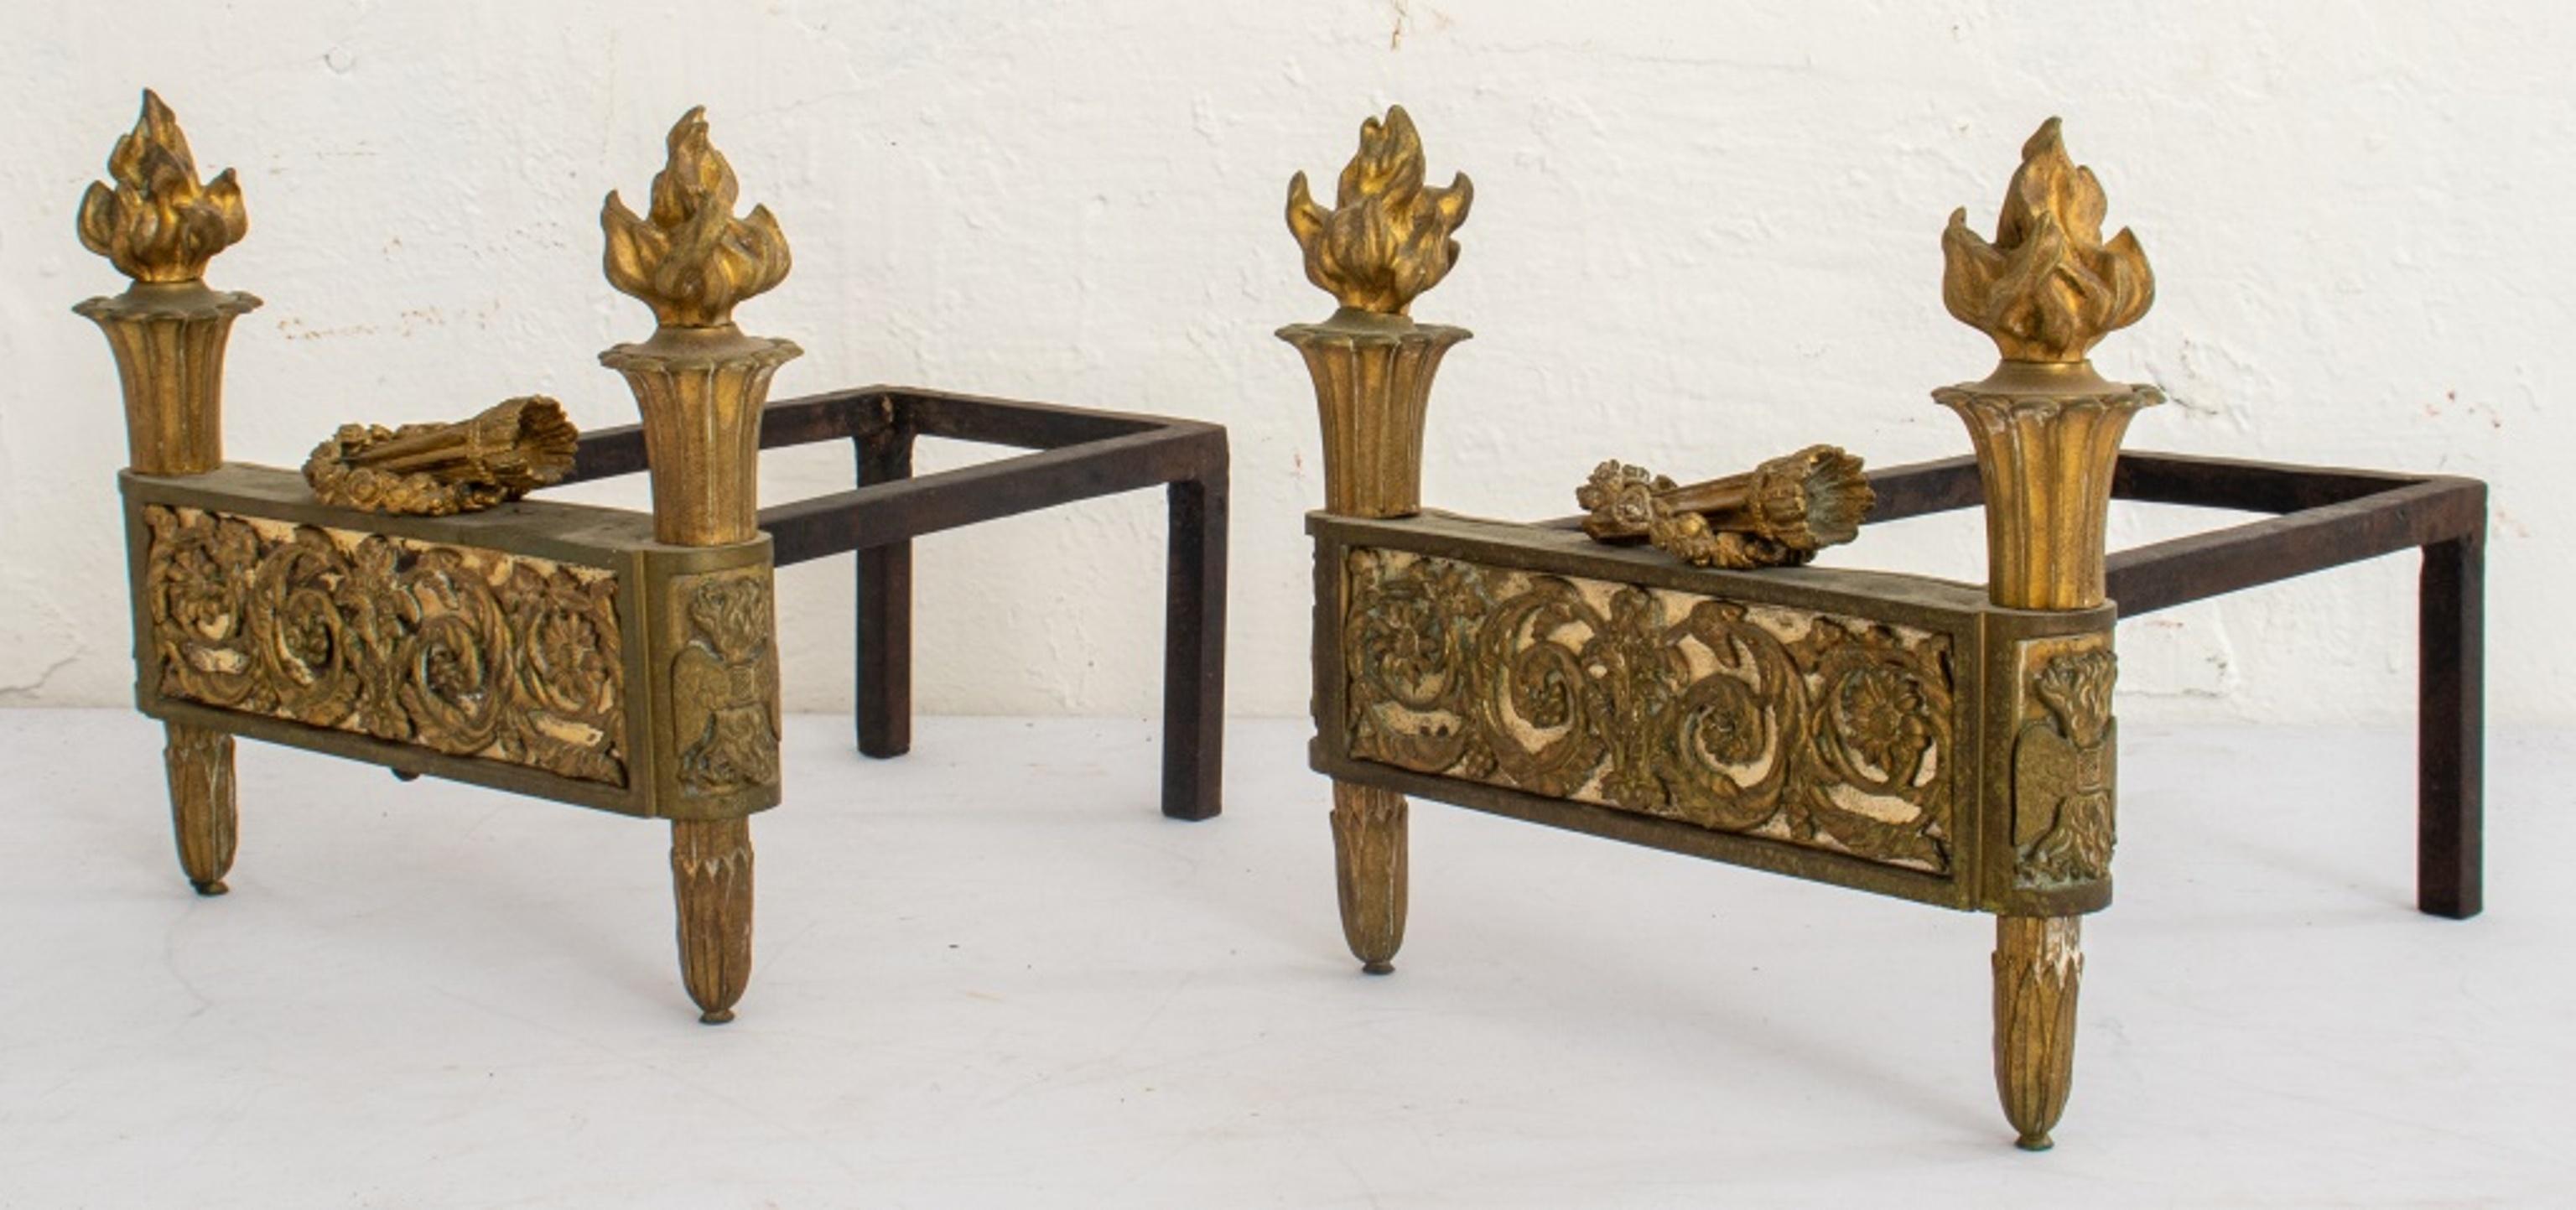 Louis XVI style gilt bronze chenets or fire dogs attributed to Bouhon Freres, with a central frieze of acanthus scrollwork surmounted by wreaths (losses), and supported by two quivers of arrows. In very good vintage condition.

Dealer: S138XX